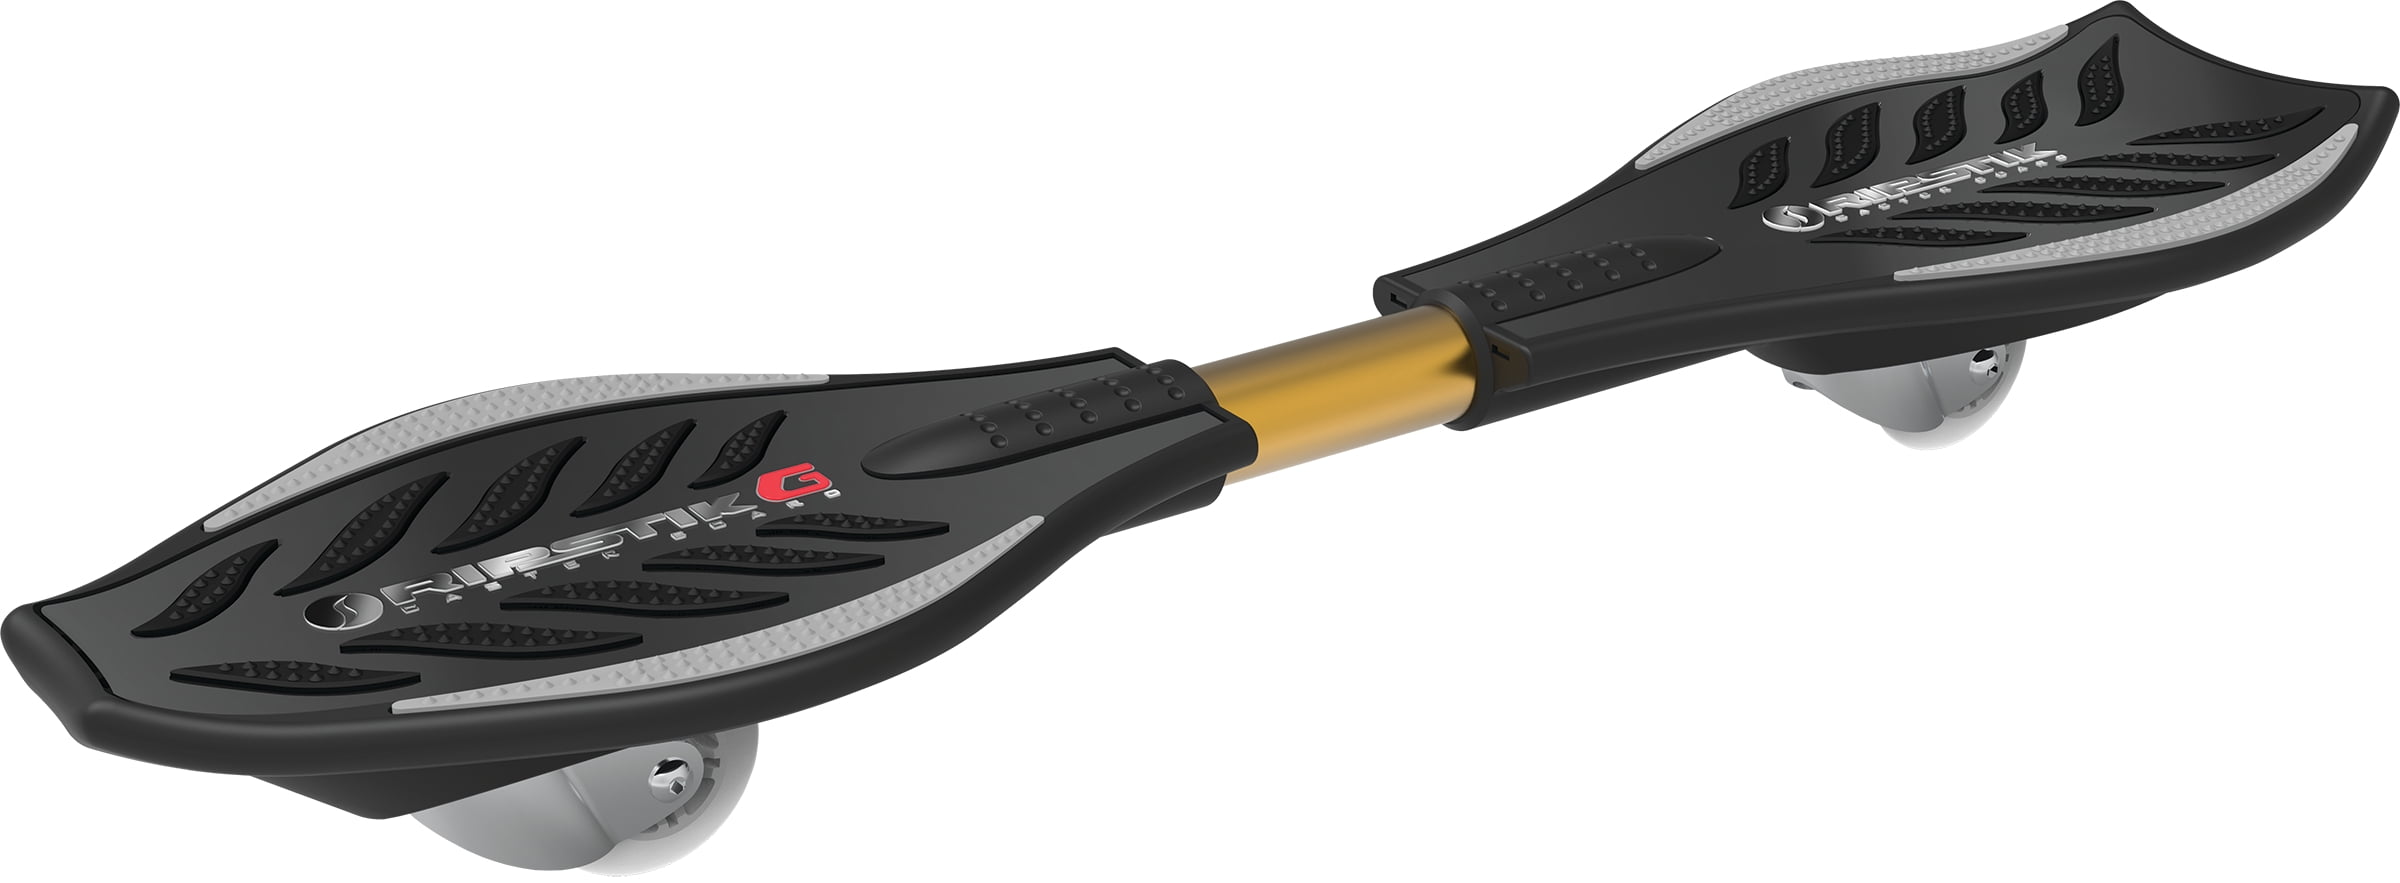 Razor RipStik G - Black, Caster Board with 76mm 360-Degree Wheels, for  Kids, Teens, and Adults